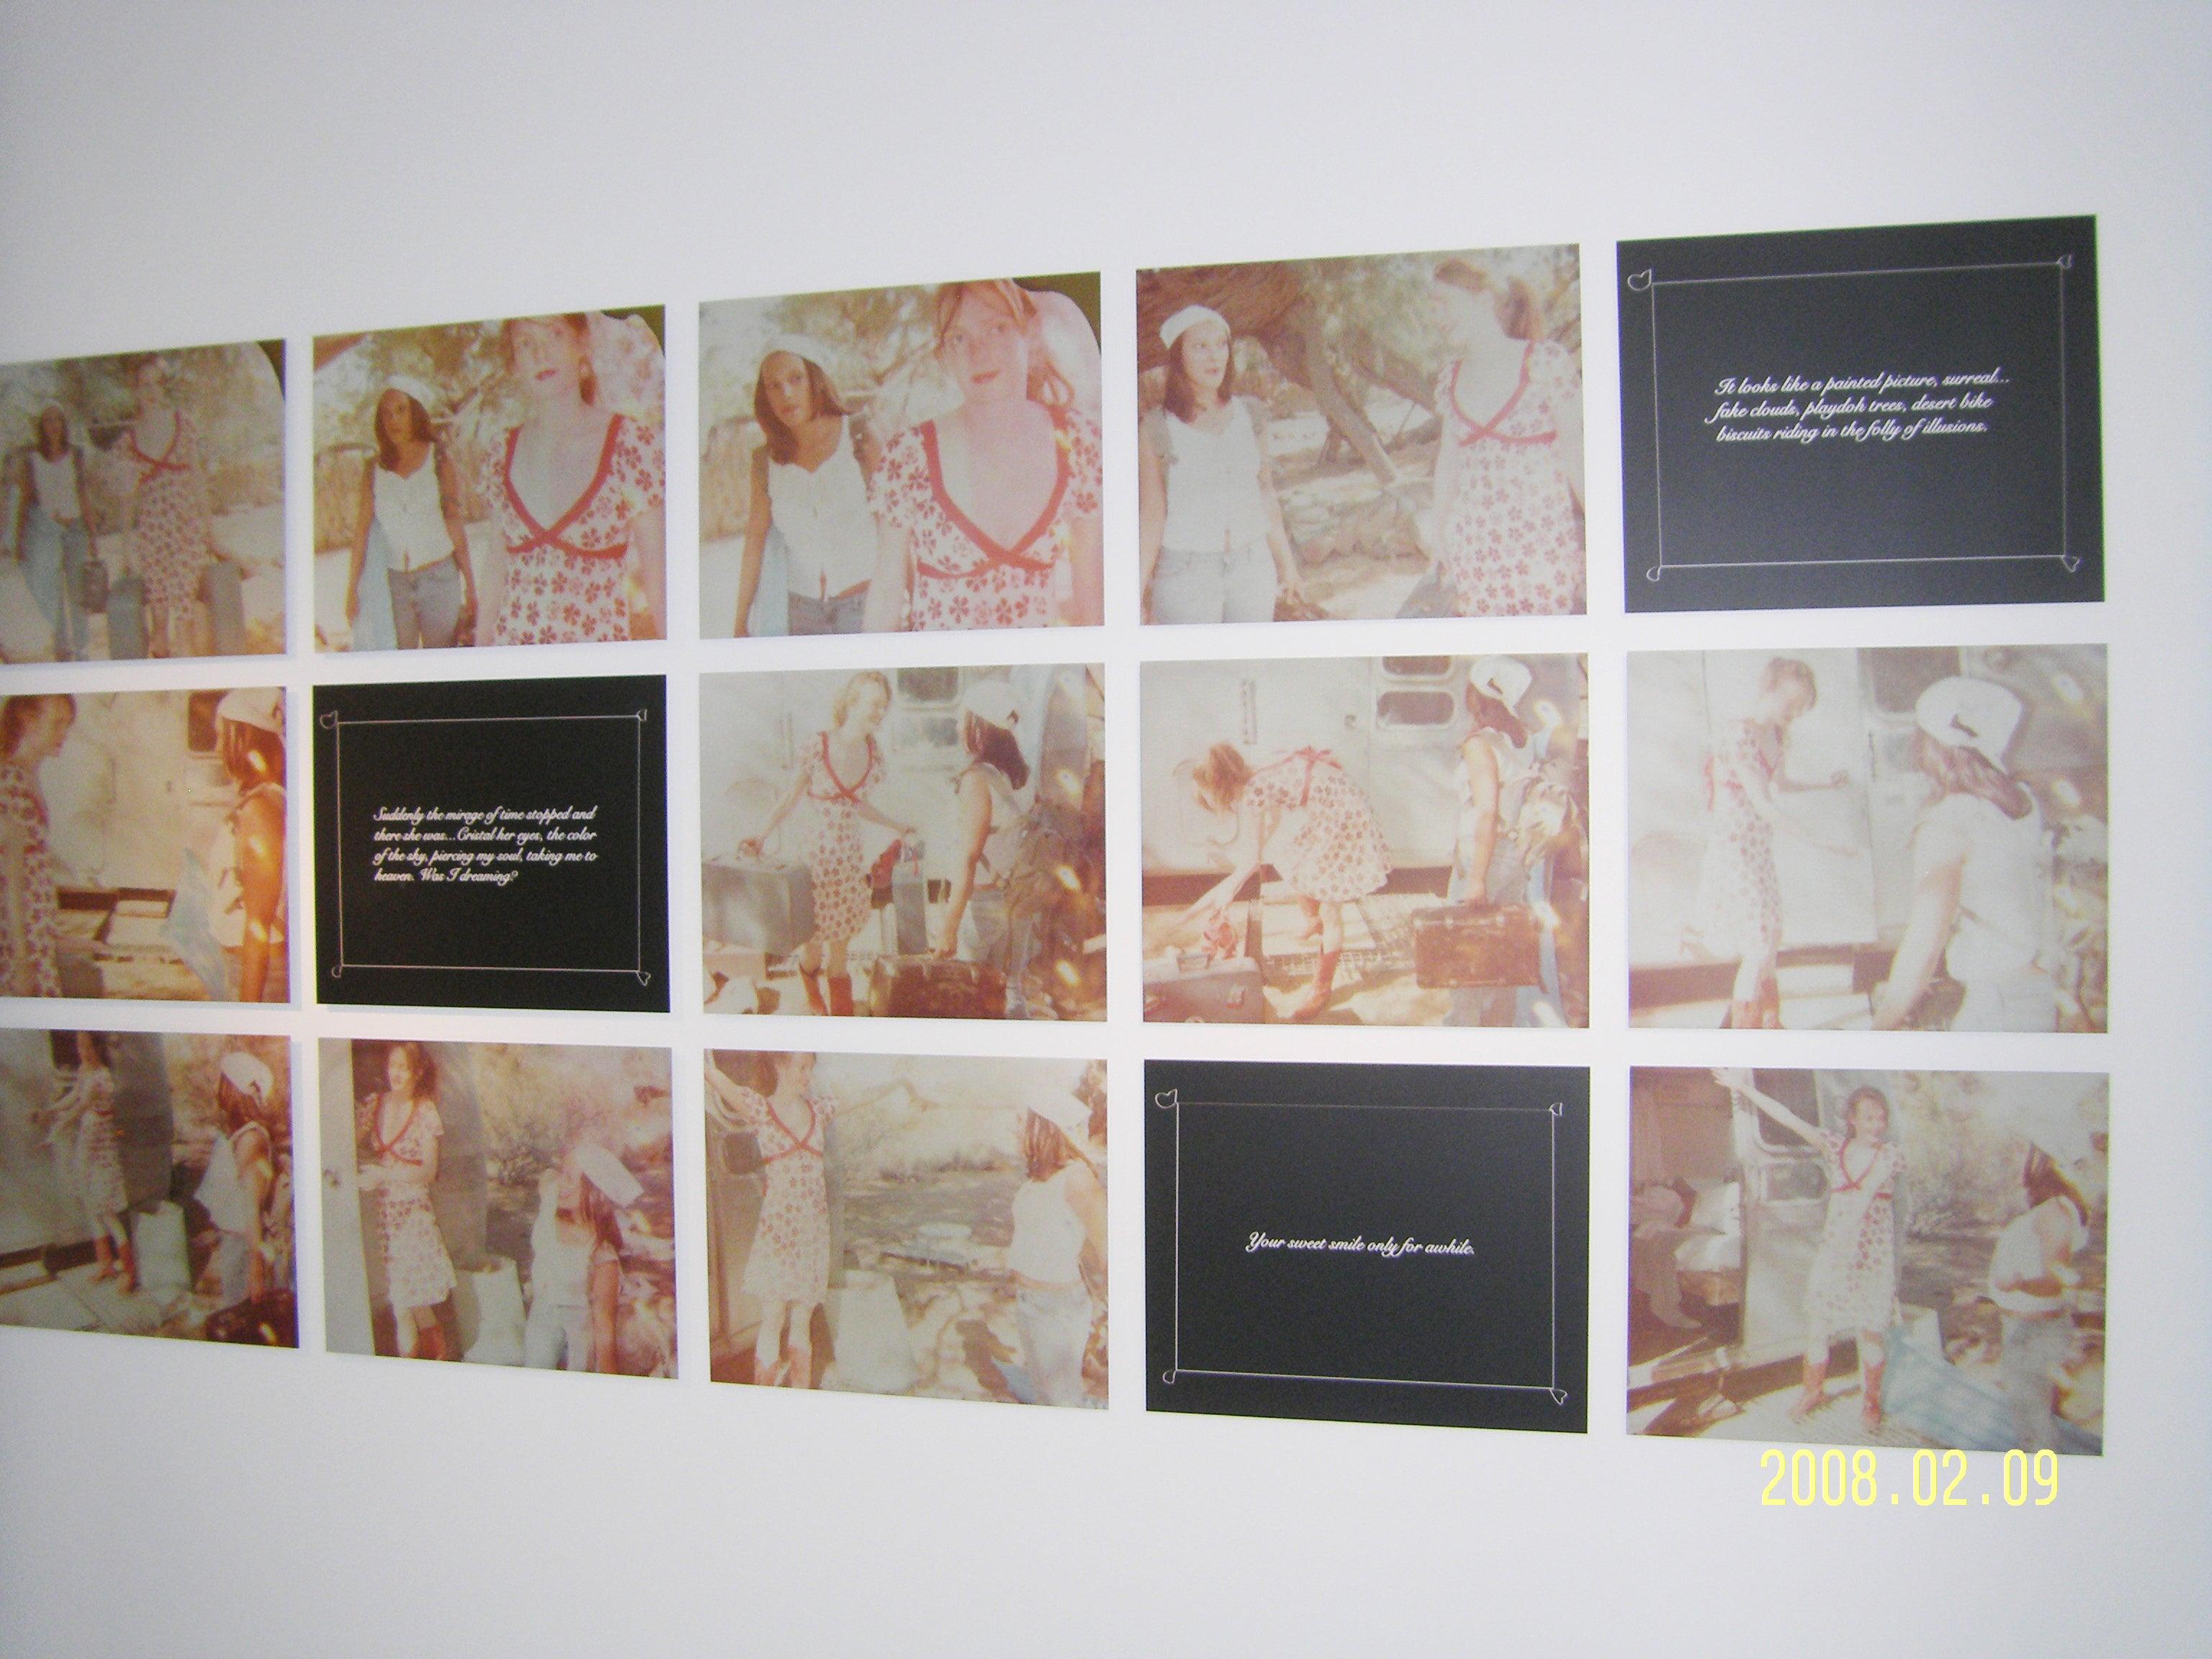 Moving in Together (Till Death do us Part) - analog, mounted, Installation 1